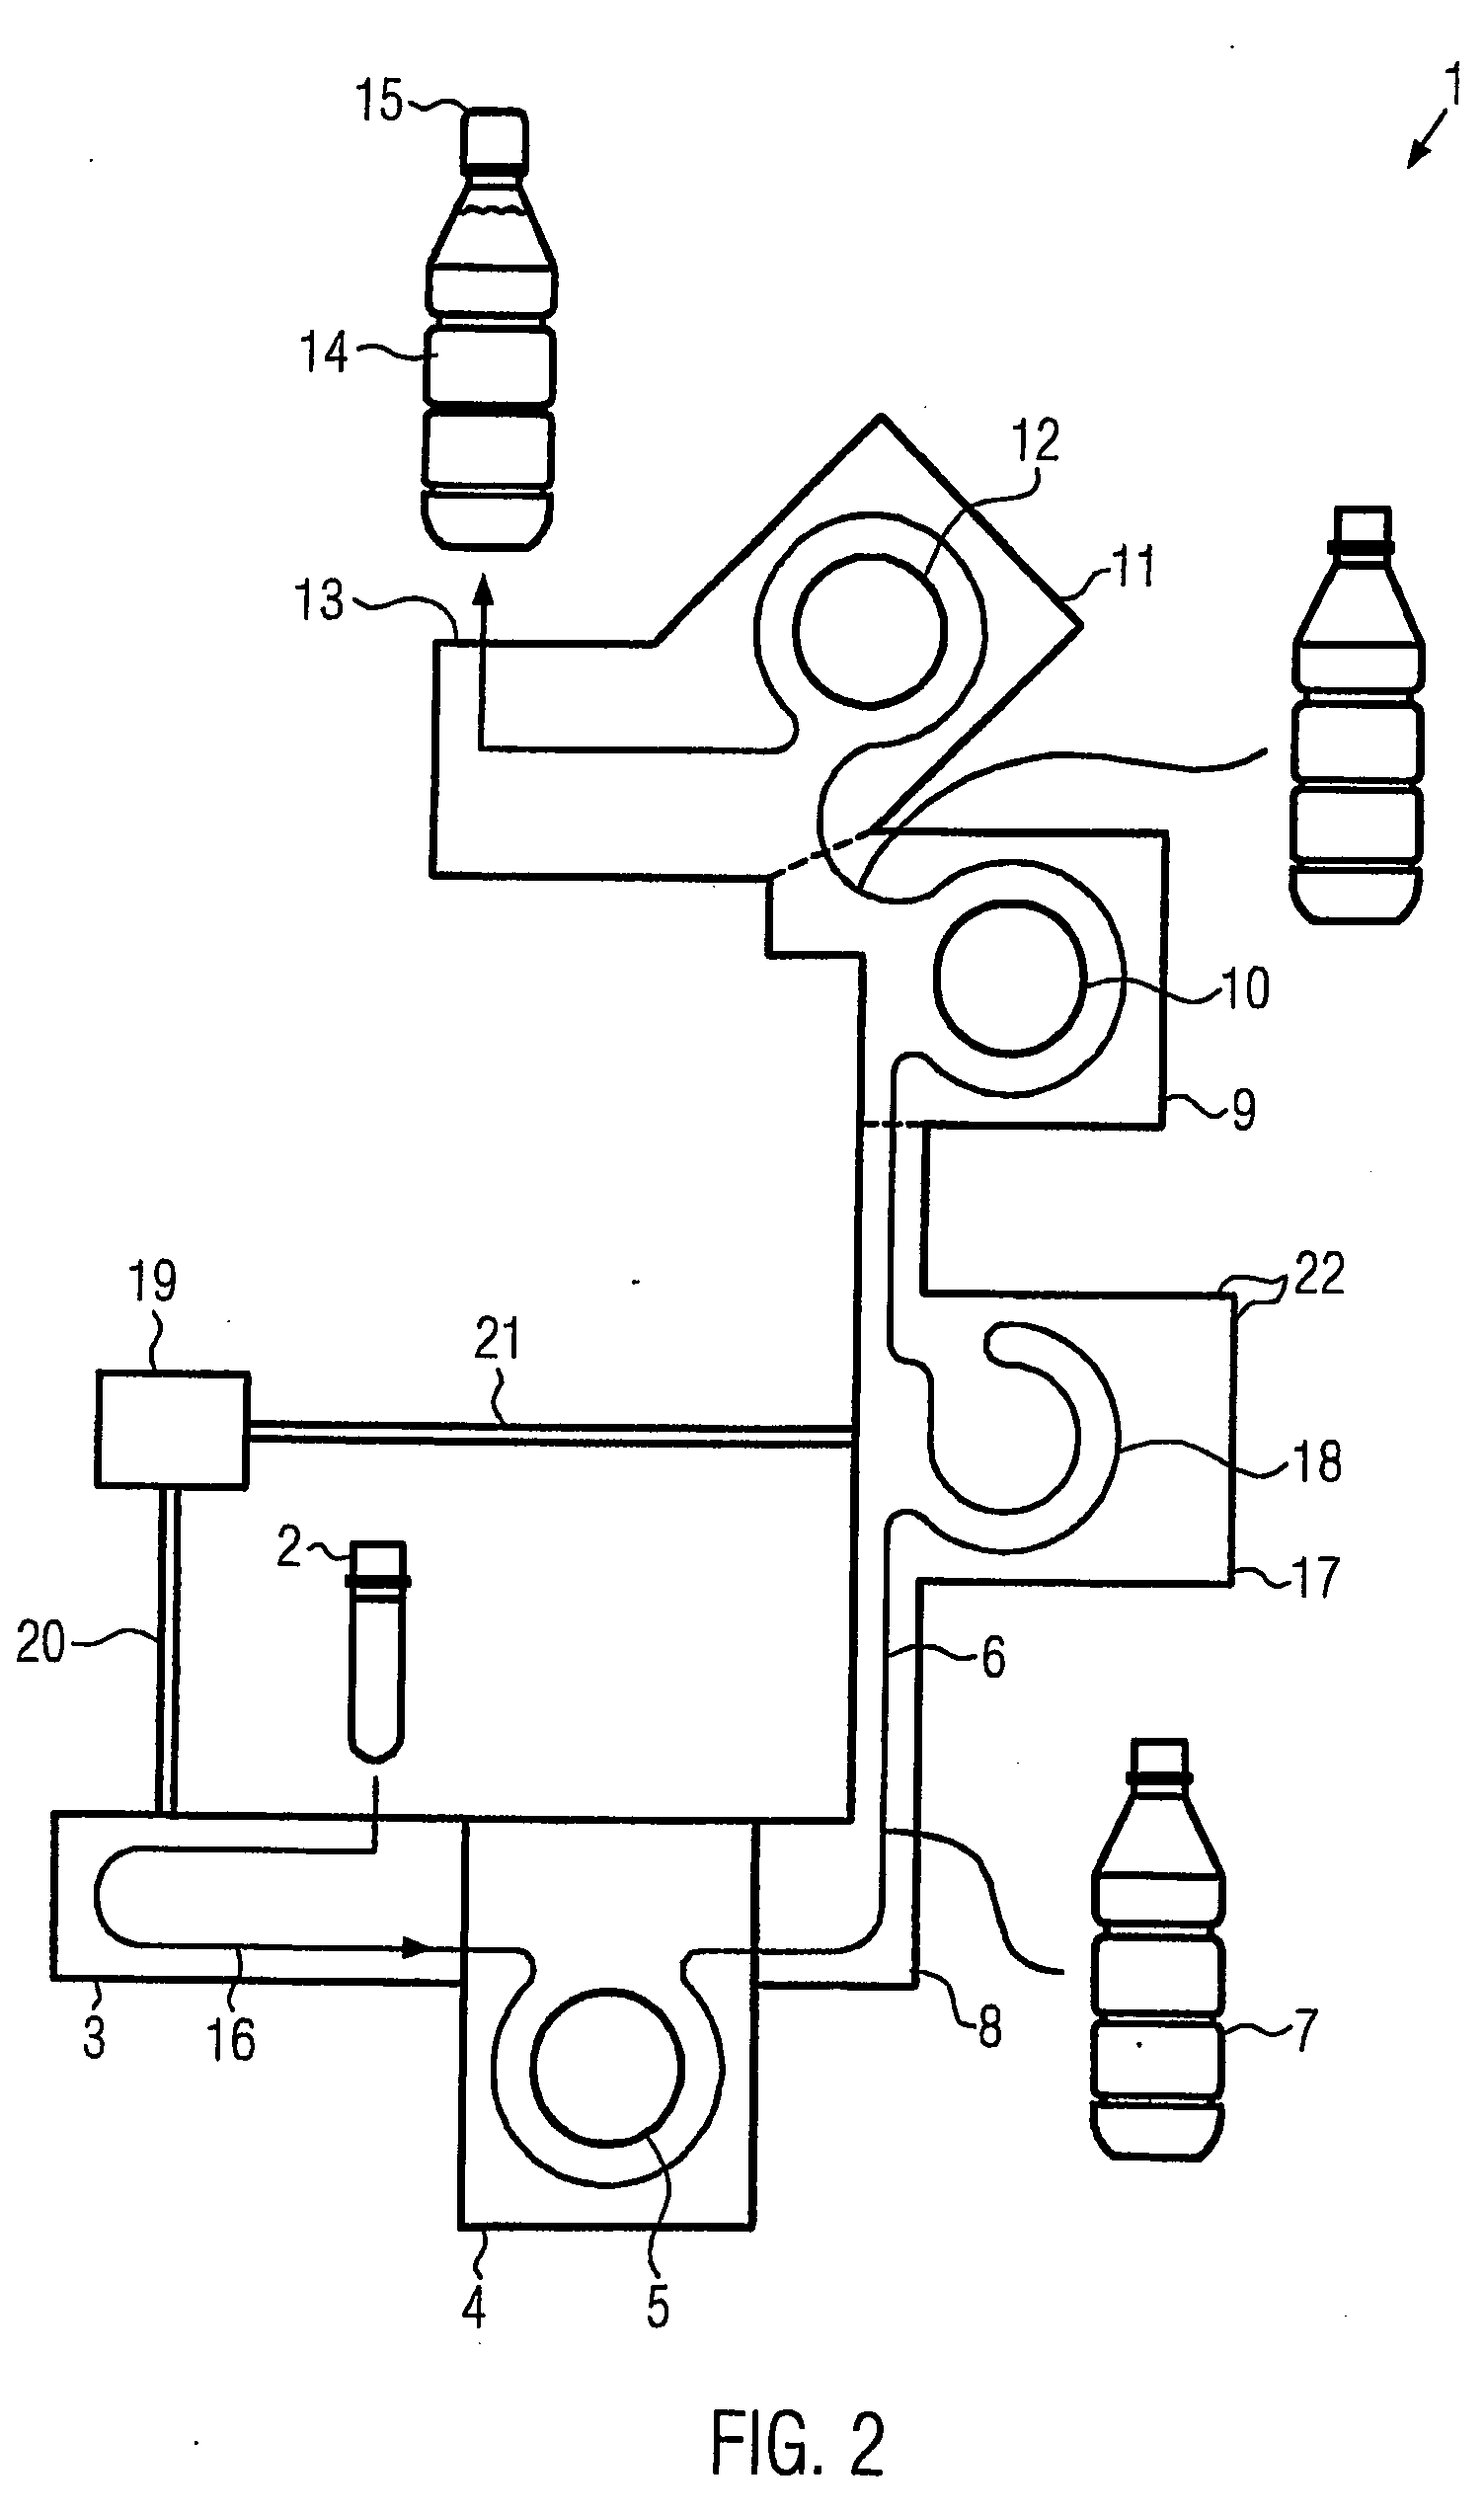 Method and device for the sterile filling with fluids